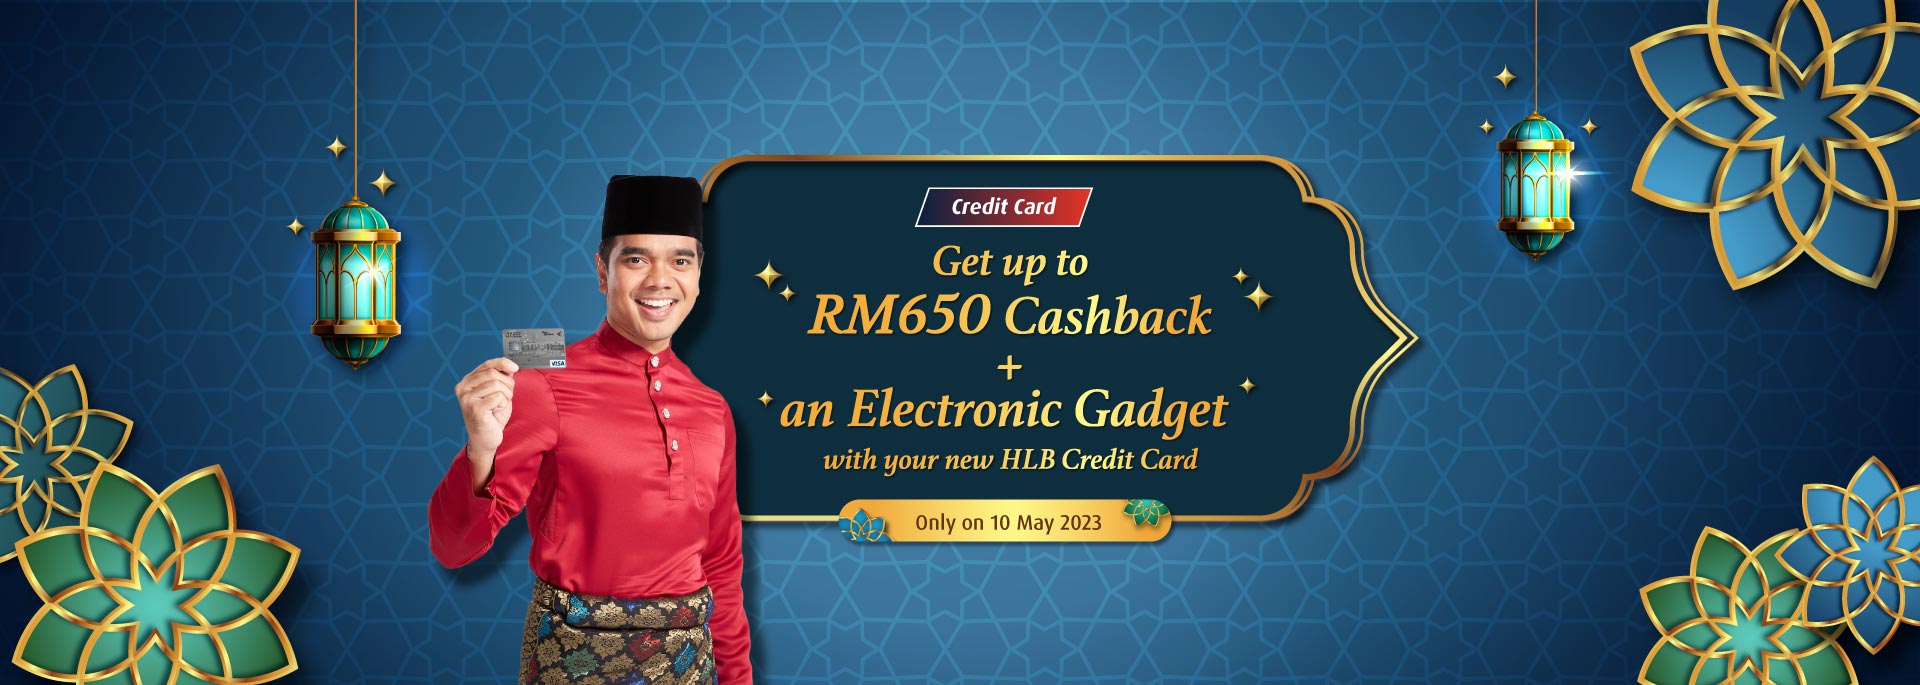 Get up to RM650 cashback with your new HLB Credit Card